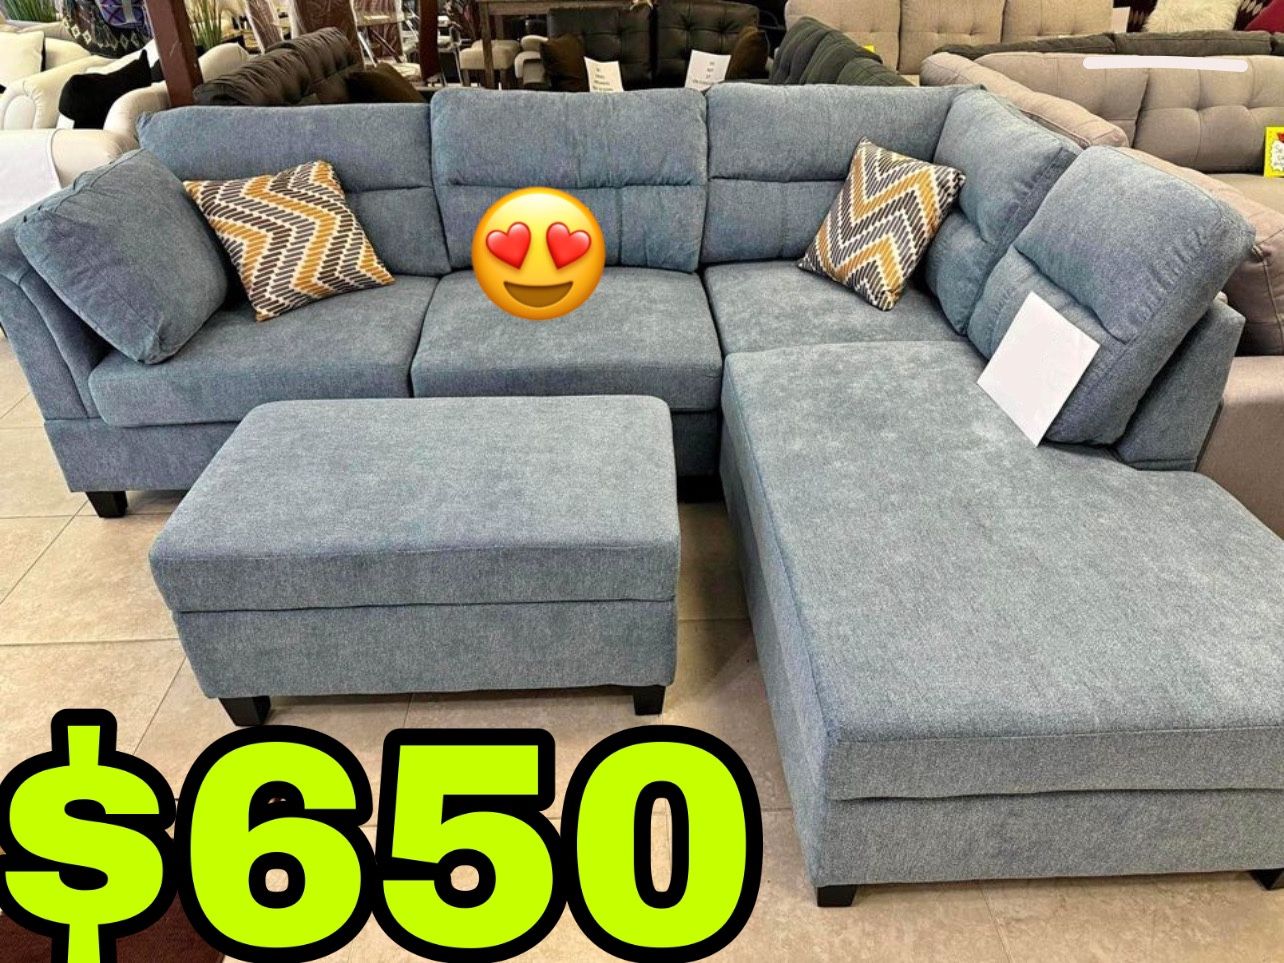 Beautiful New Sectional Sofa W/ Storage Ottoman in Gray Fabric Only $650!!!